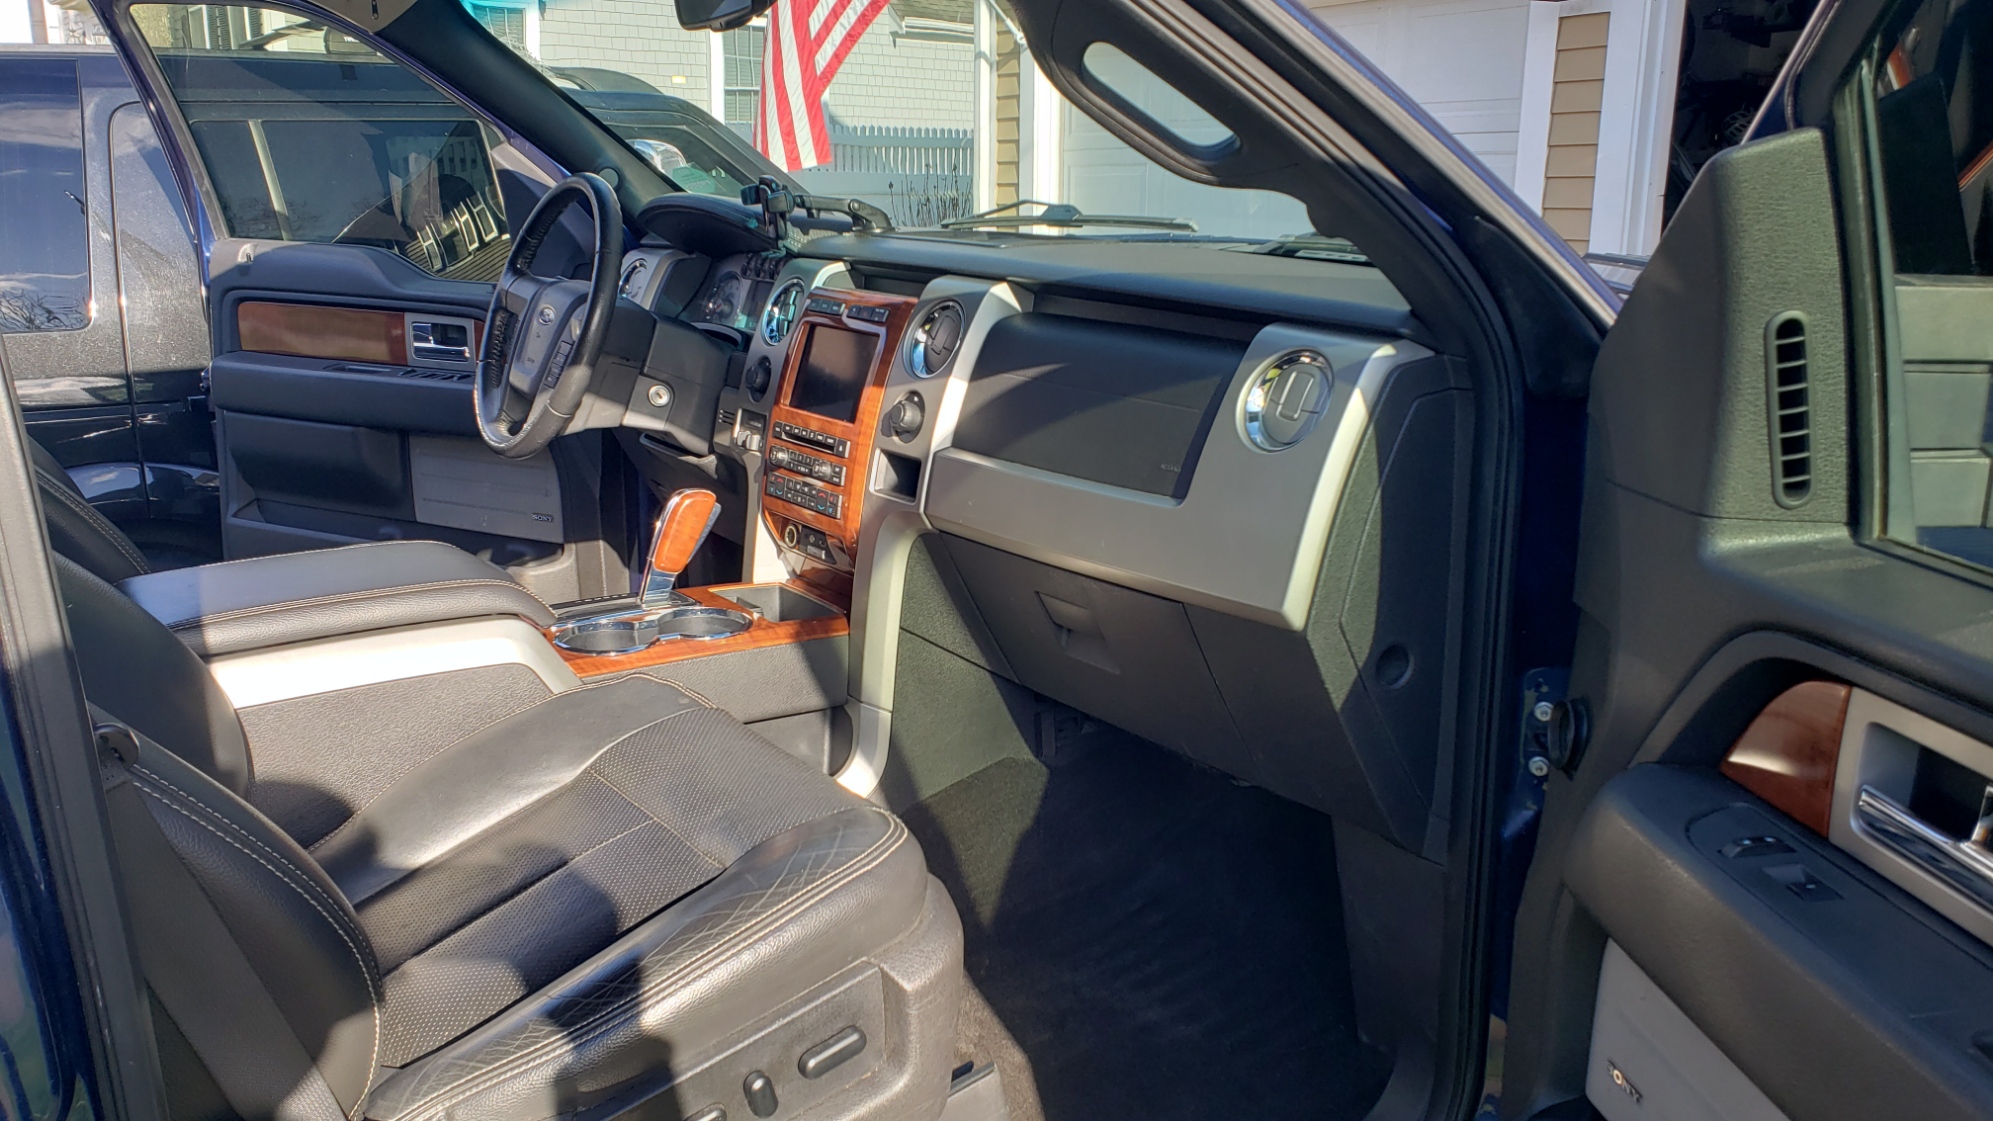 2010 Ford F150 Lariat Supercrew, 6.5 foot bed - Full Raptor Swap - 177k  miles - Located in Cape Cod, MA. $16k